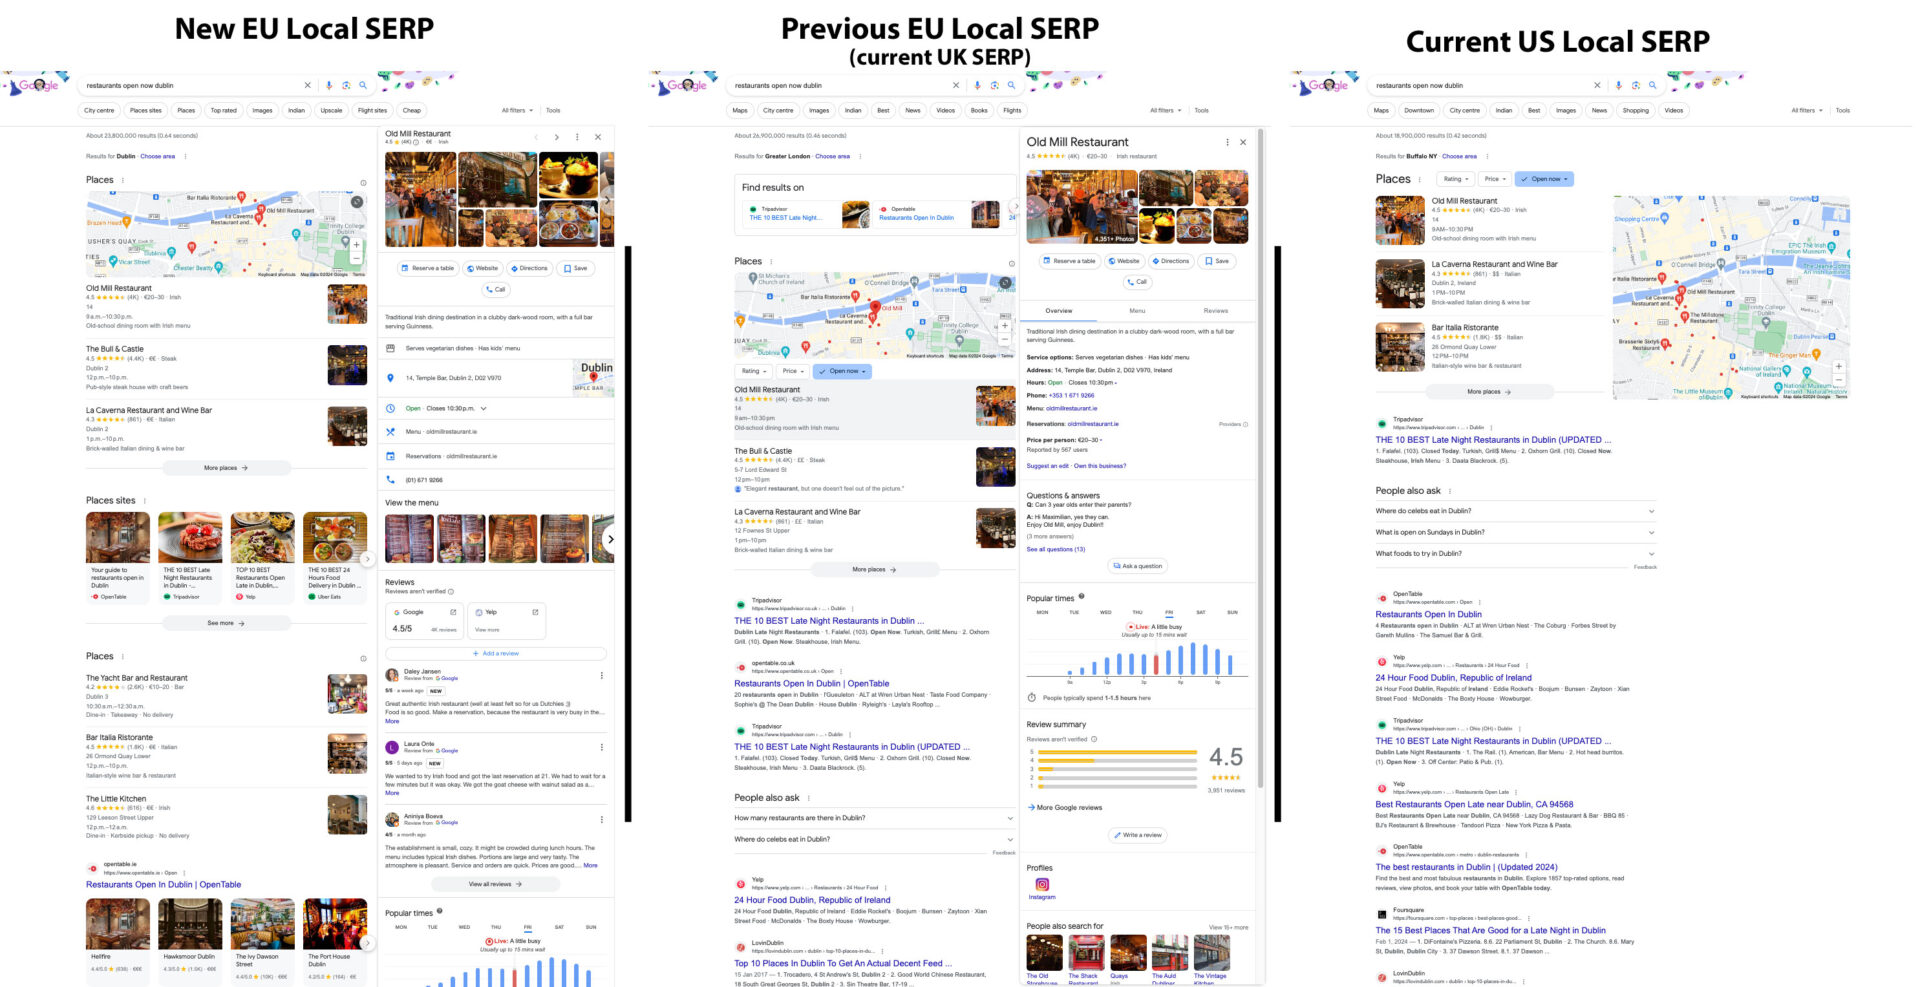 An example of what the Google SERP is looking like in Europe compared to the previous SERP there and in the US today